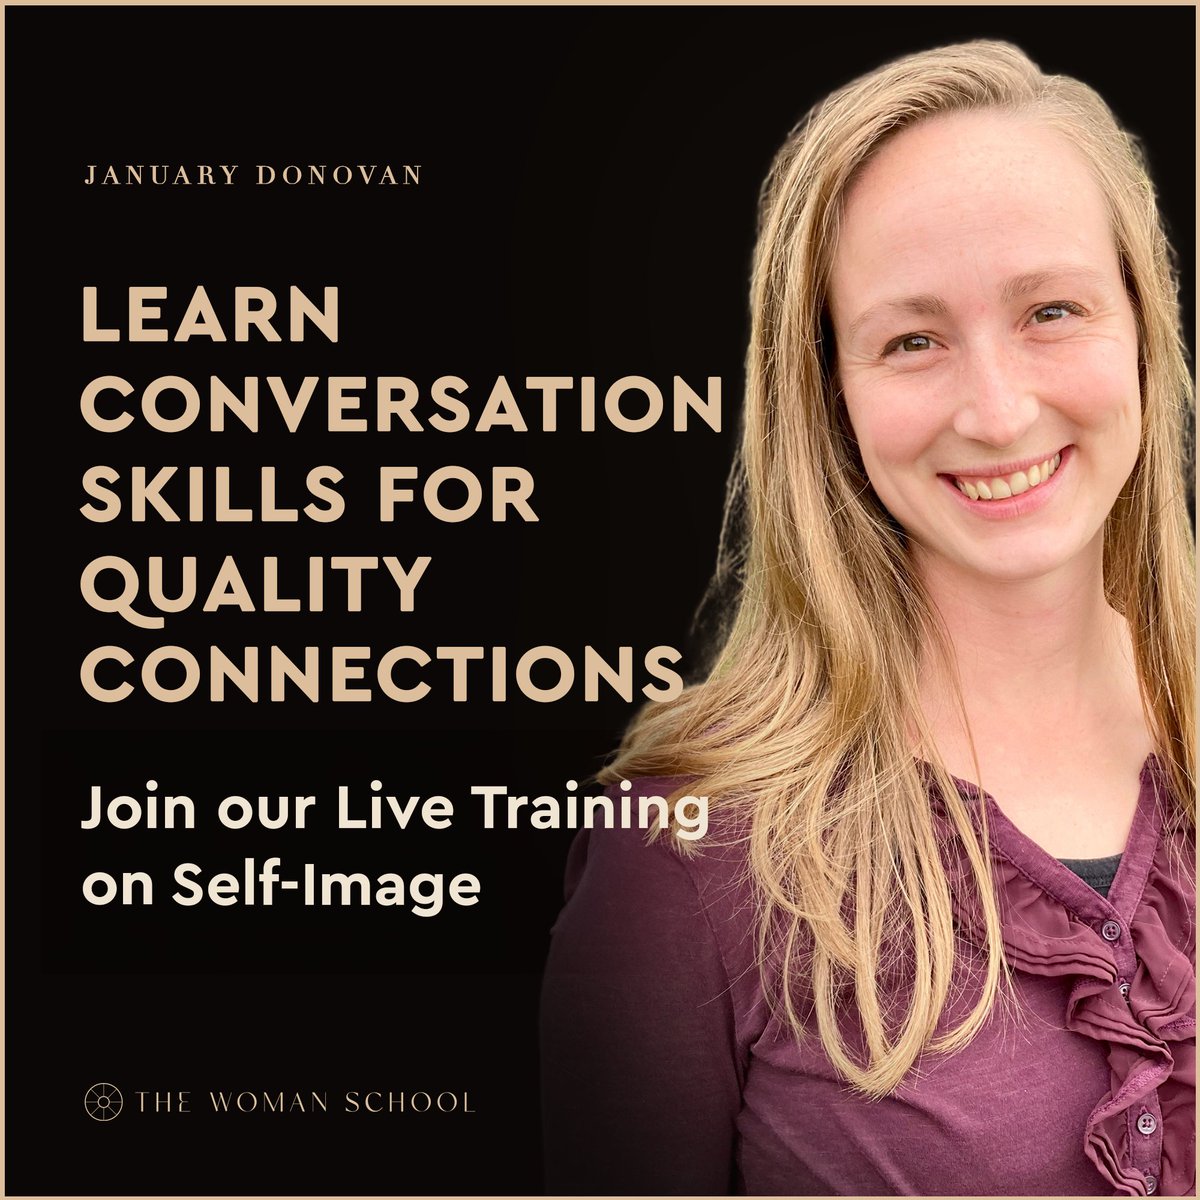 Education often overlooks vital conversation skills, leaving many in loneliness. Join our Live training to learn how to connect deeply as a woman. ✨👩 #CommunicationSkills #DeepConnections #RelationshipBuilding #WomensWorkshop #JanuaryDonovan #TheWomanSchool